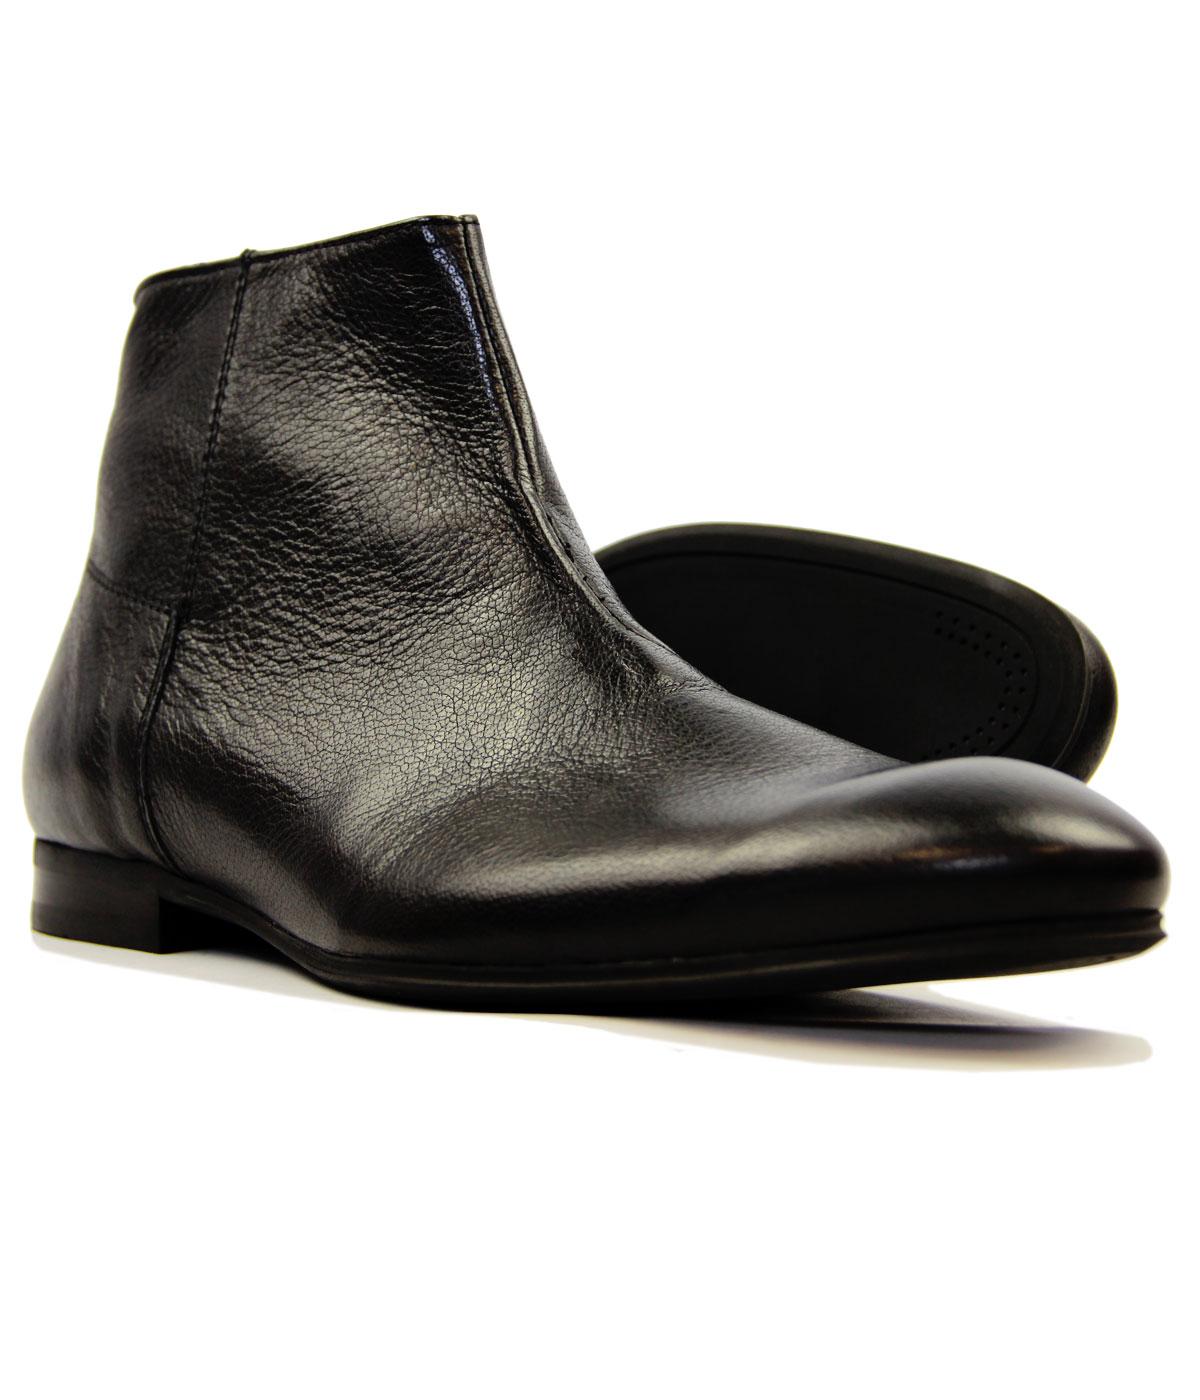 H by HUDSON Retro Side Zip Tumbled Leather Chelsea Boots in Black